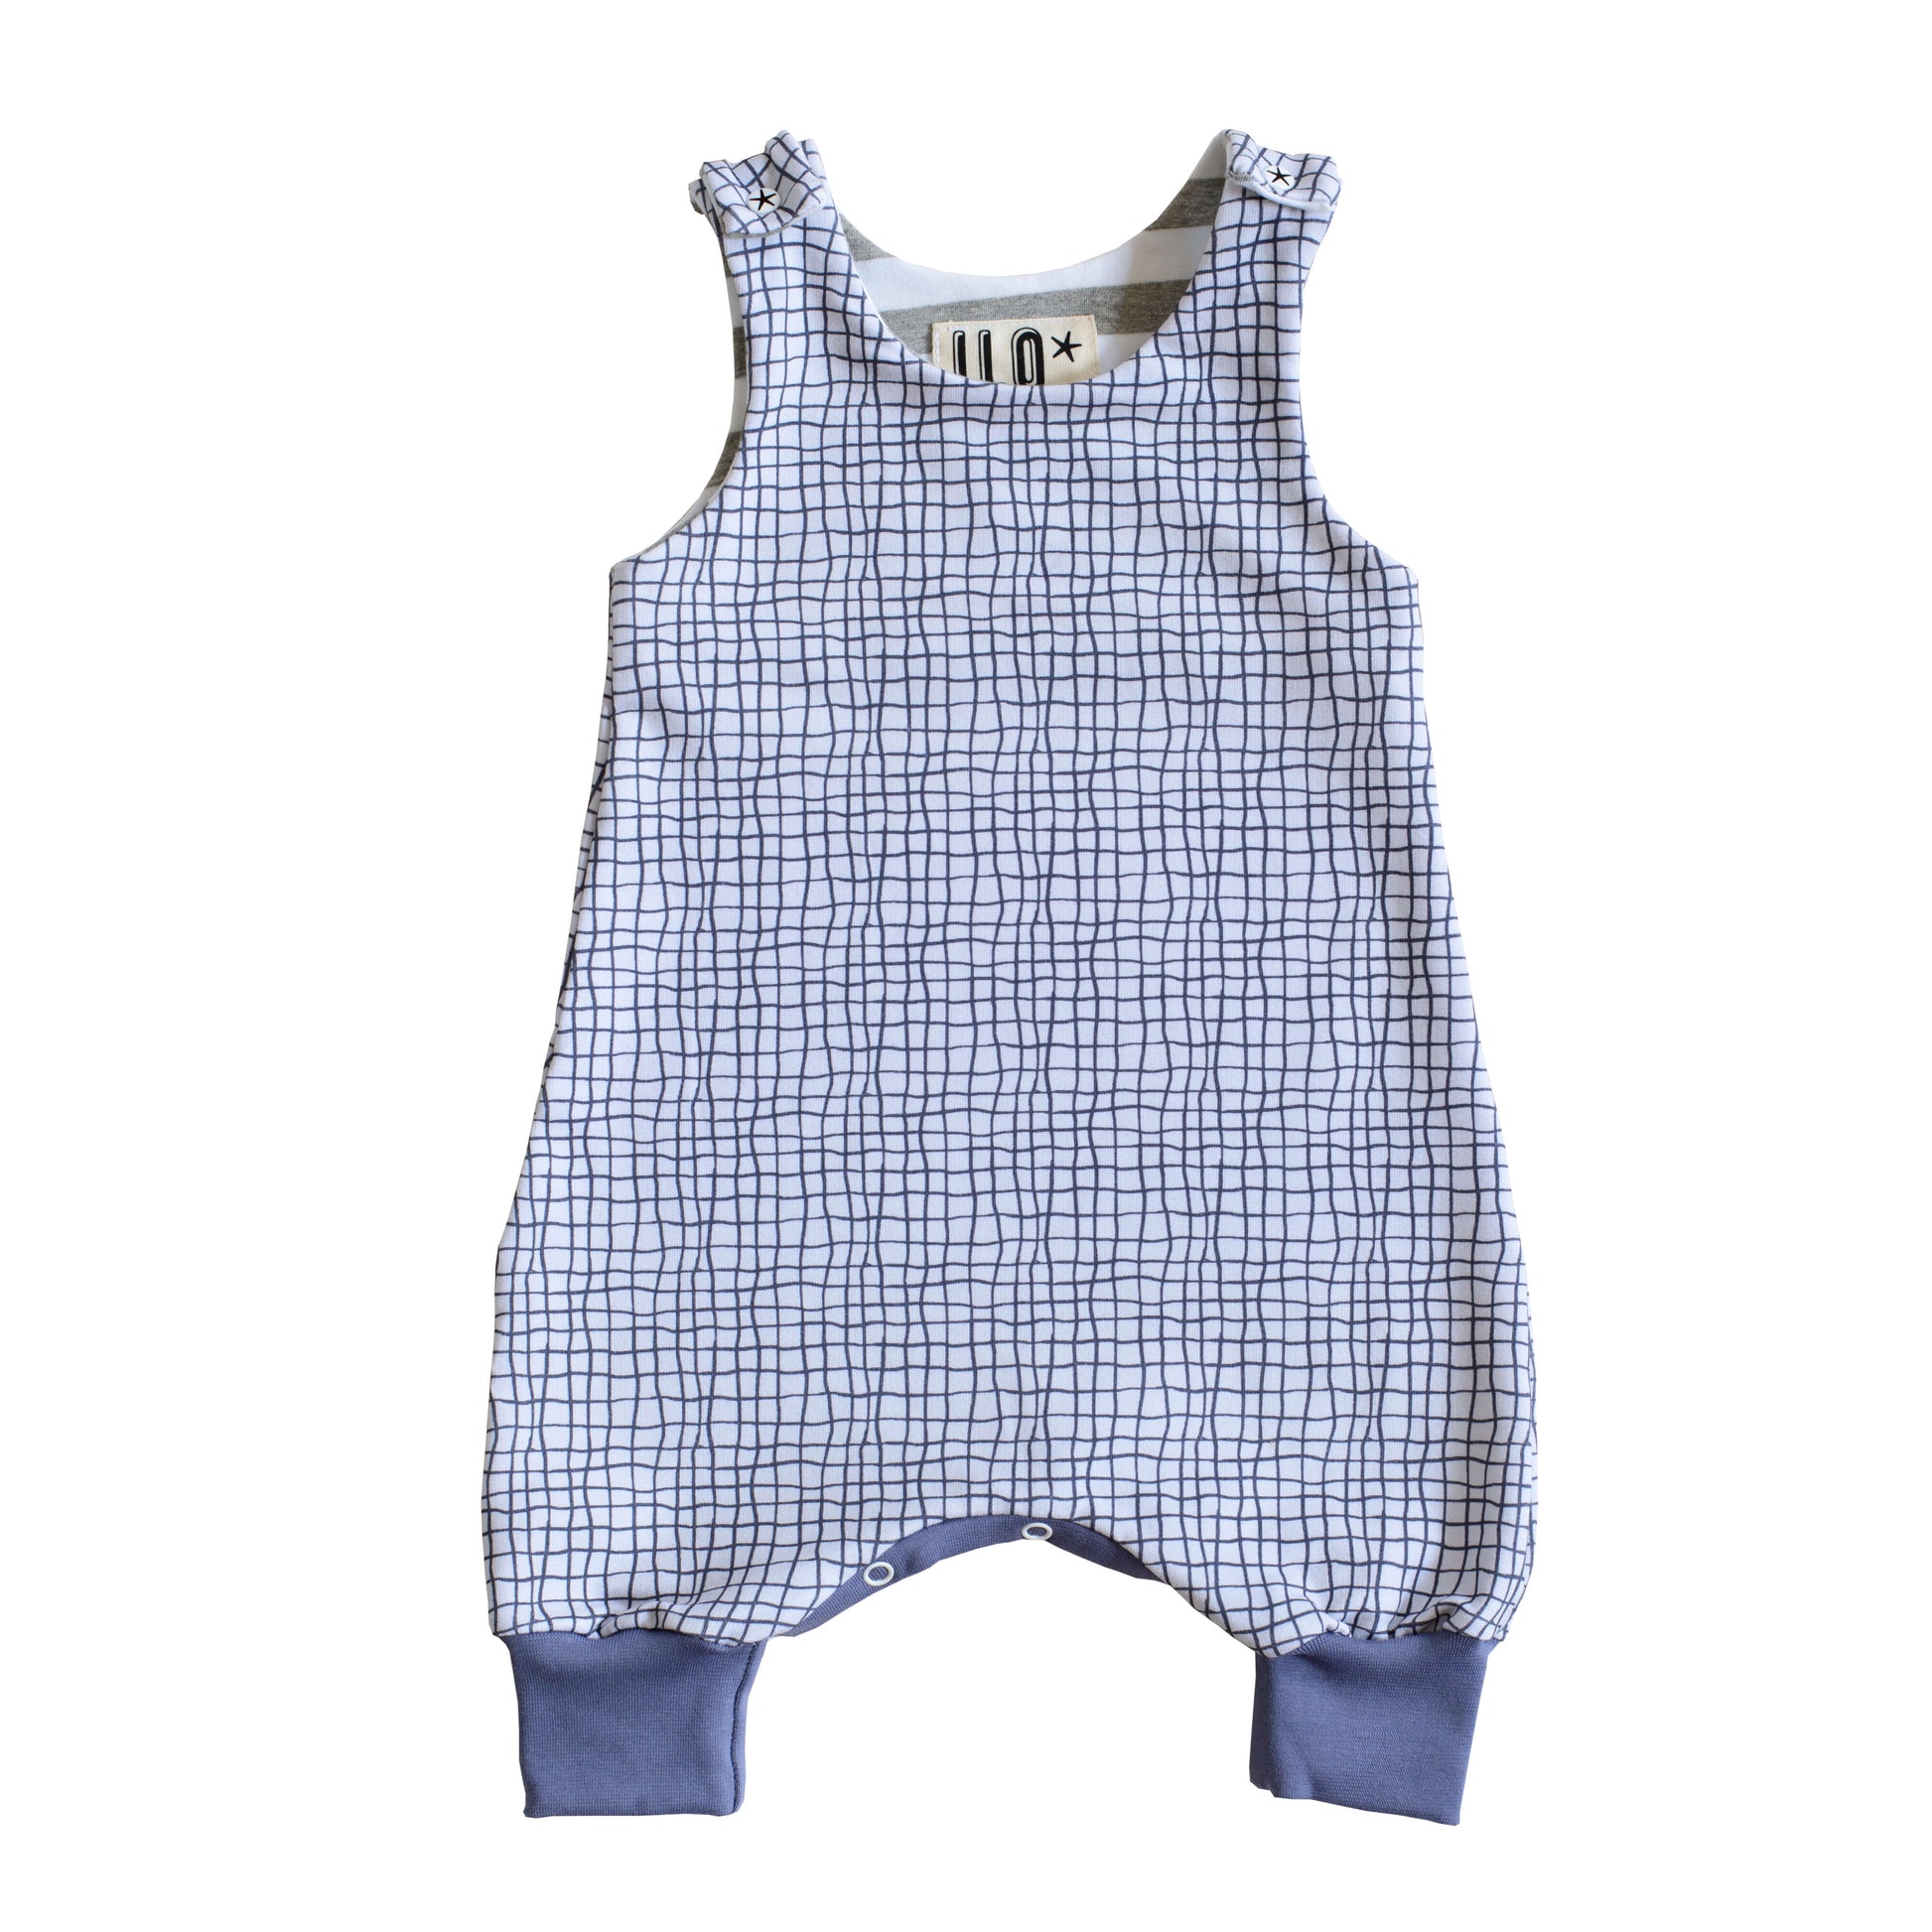 ILO grow with me romper in a black and white grid with dusty blue cuffs